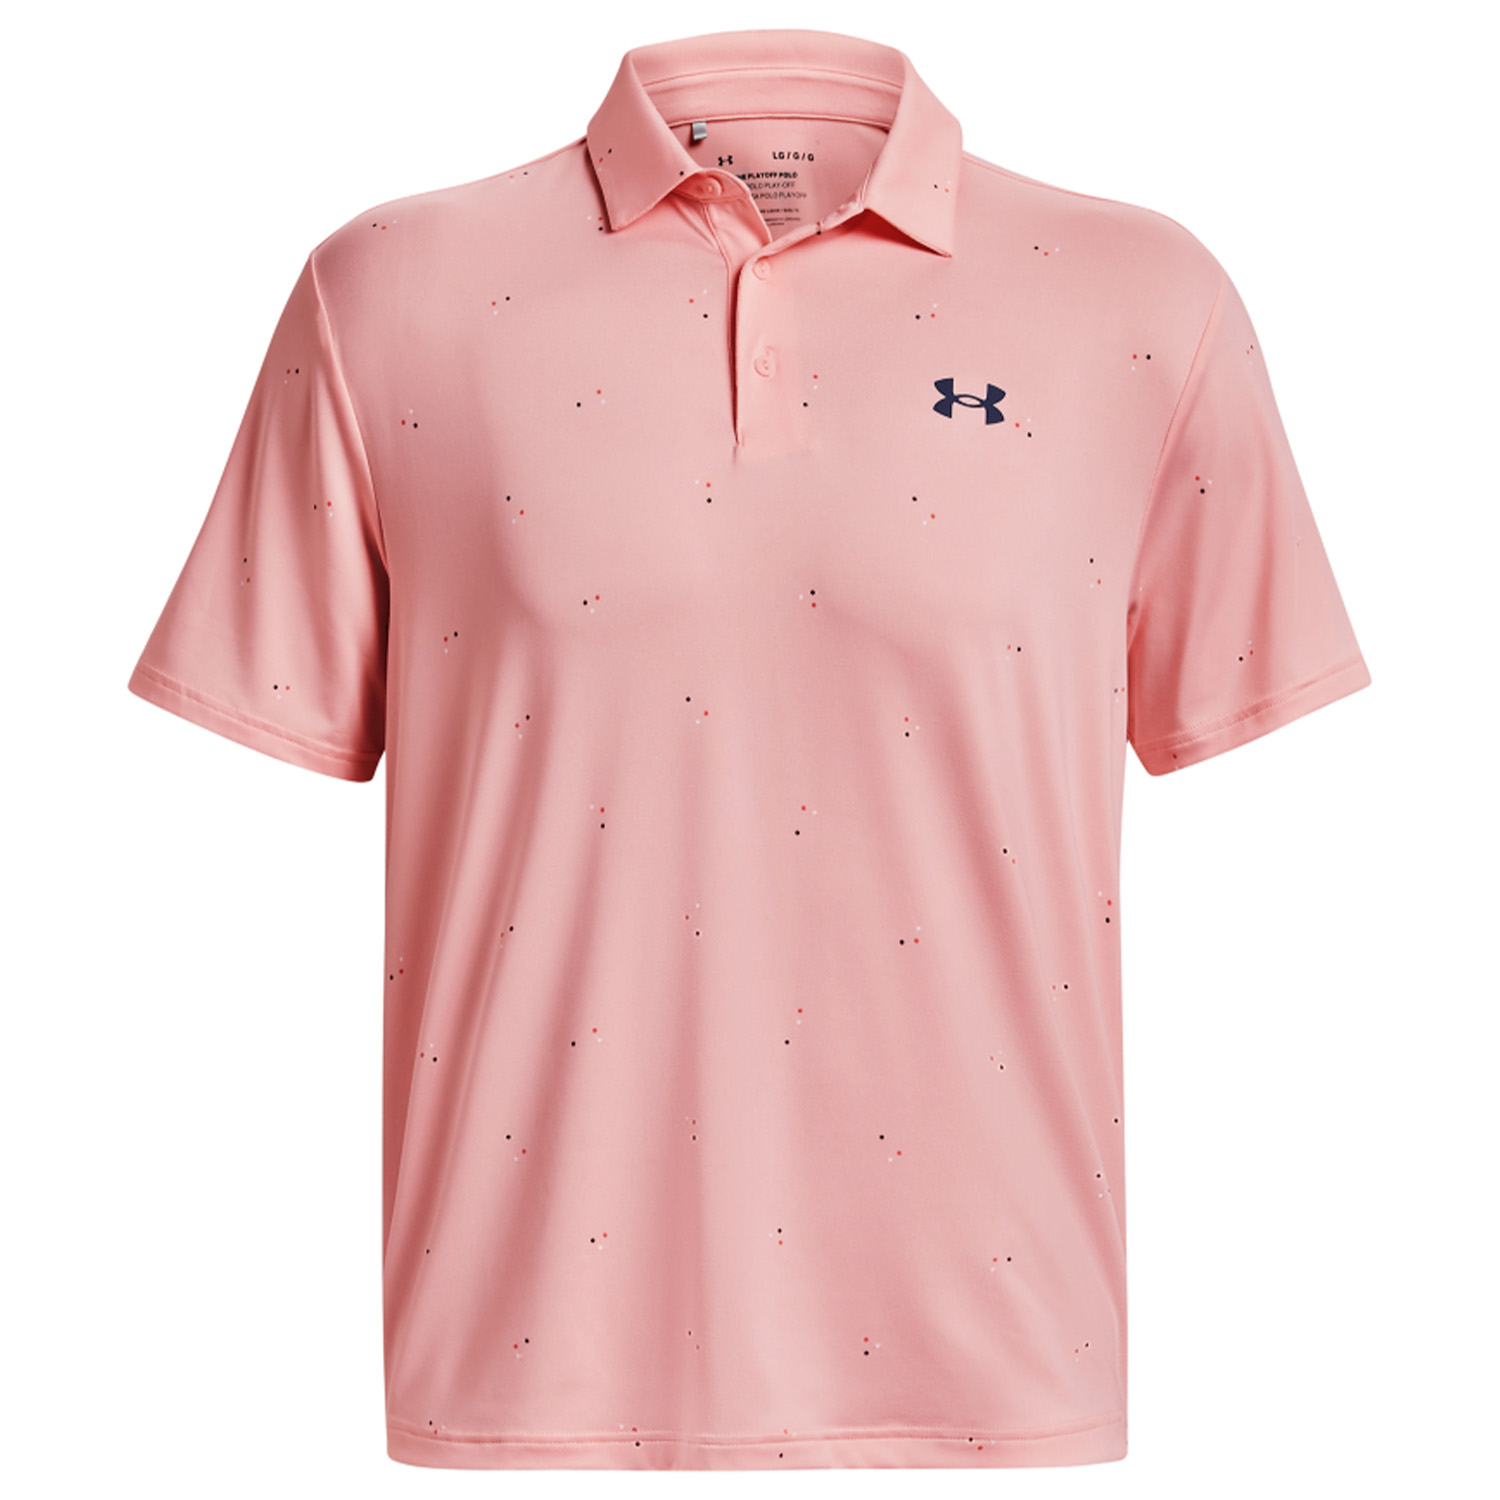 Under Armour Playoff 3.0 Printed Golf Polo Shirt